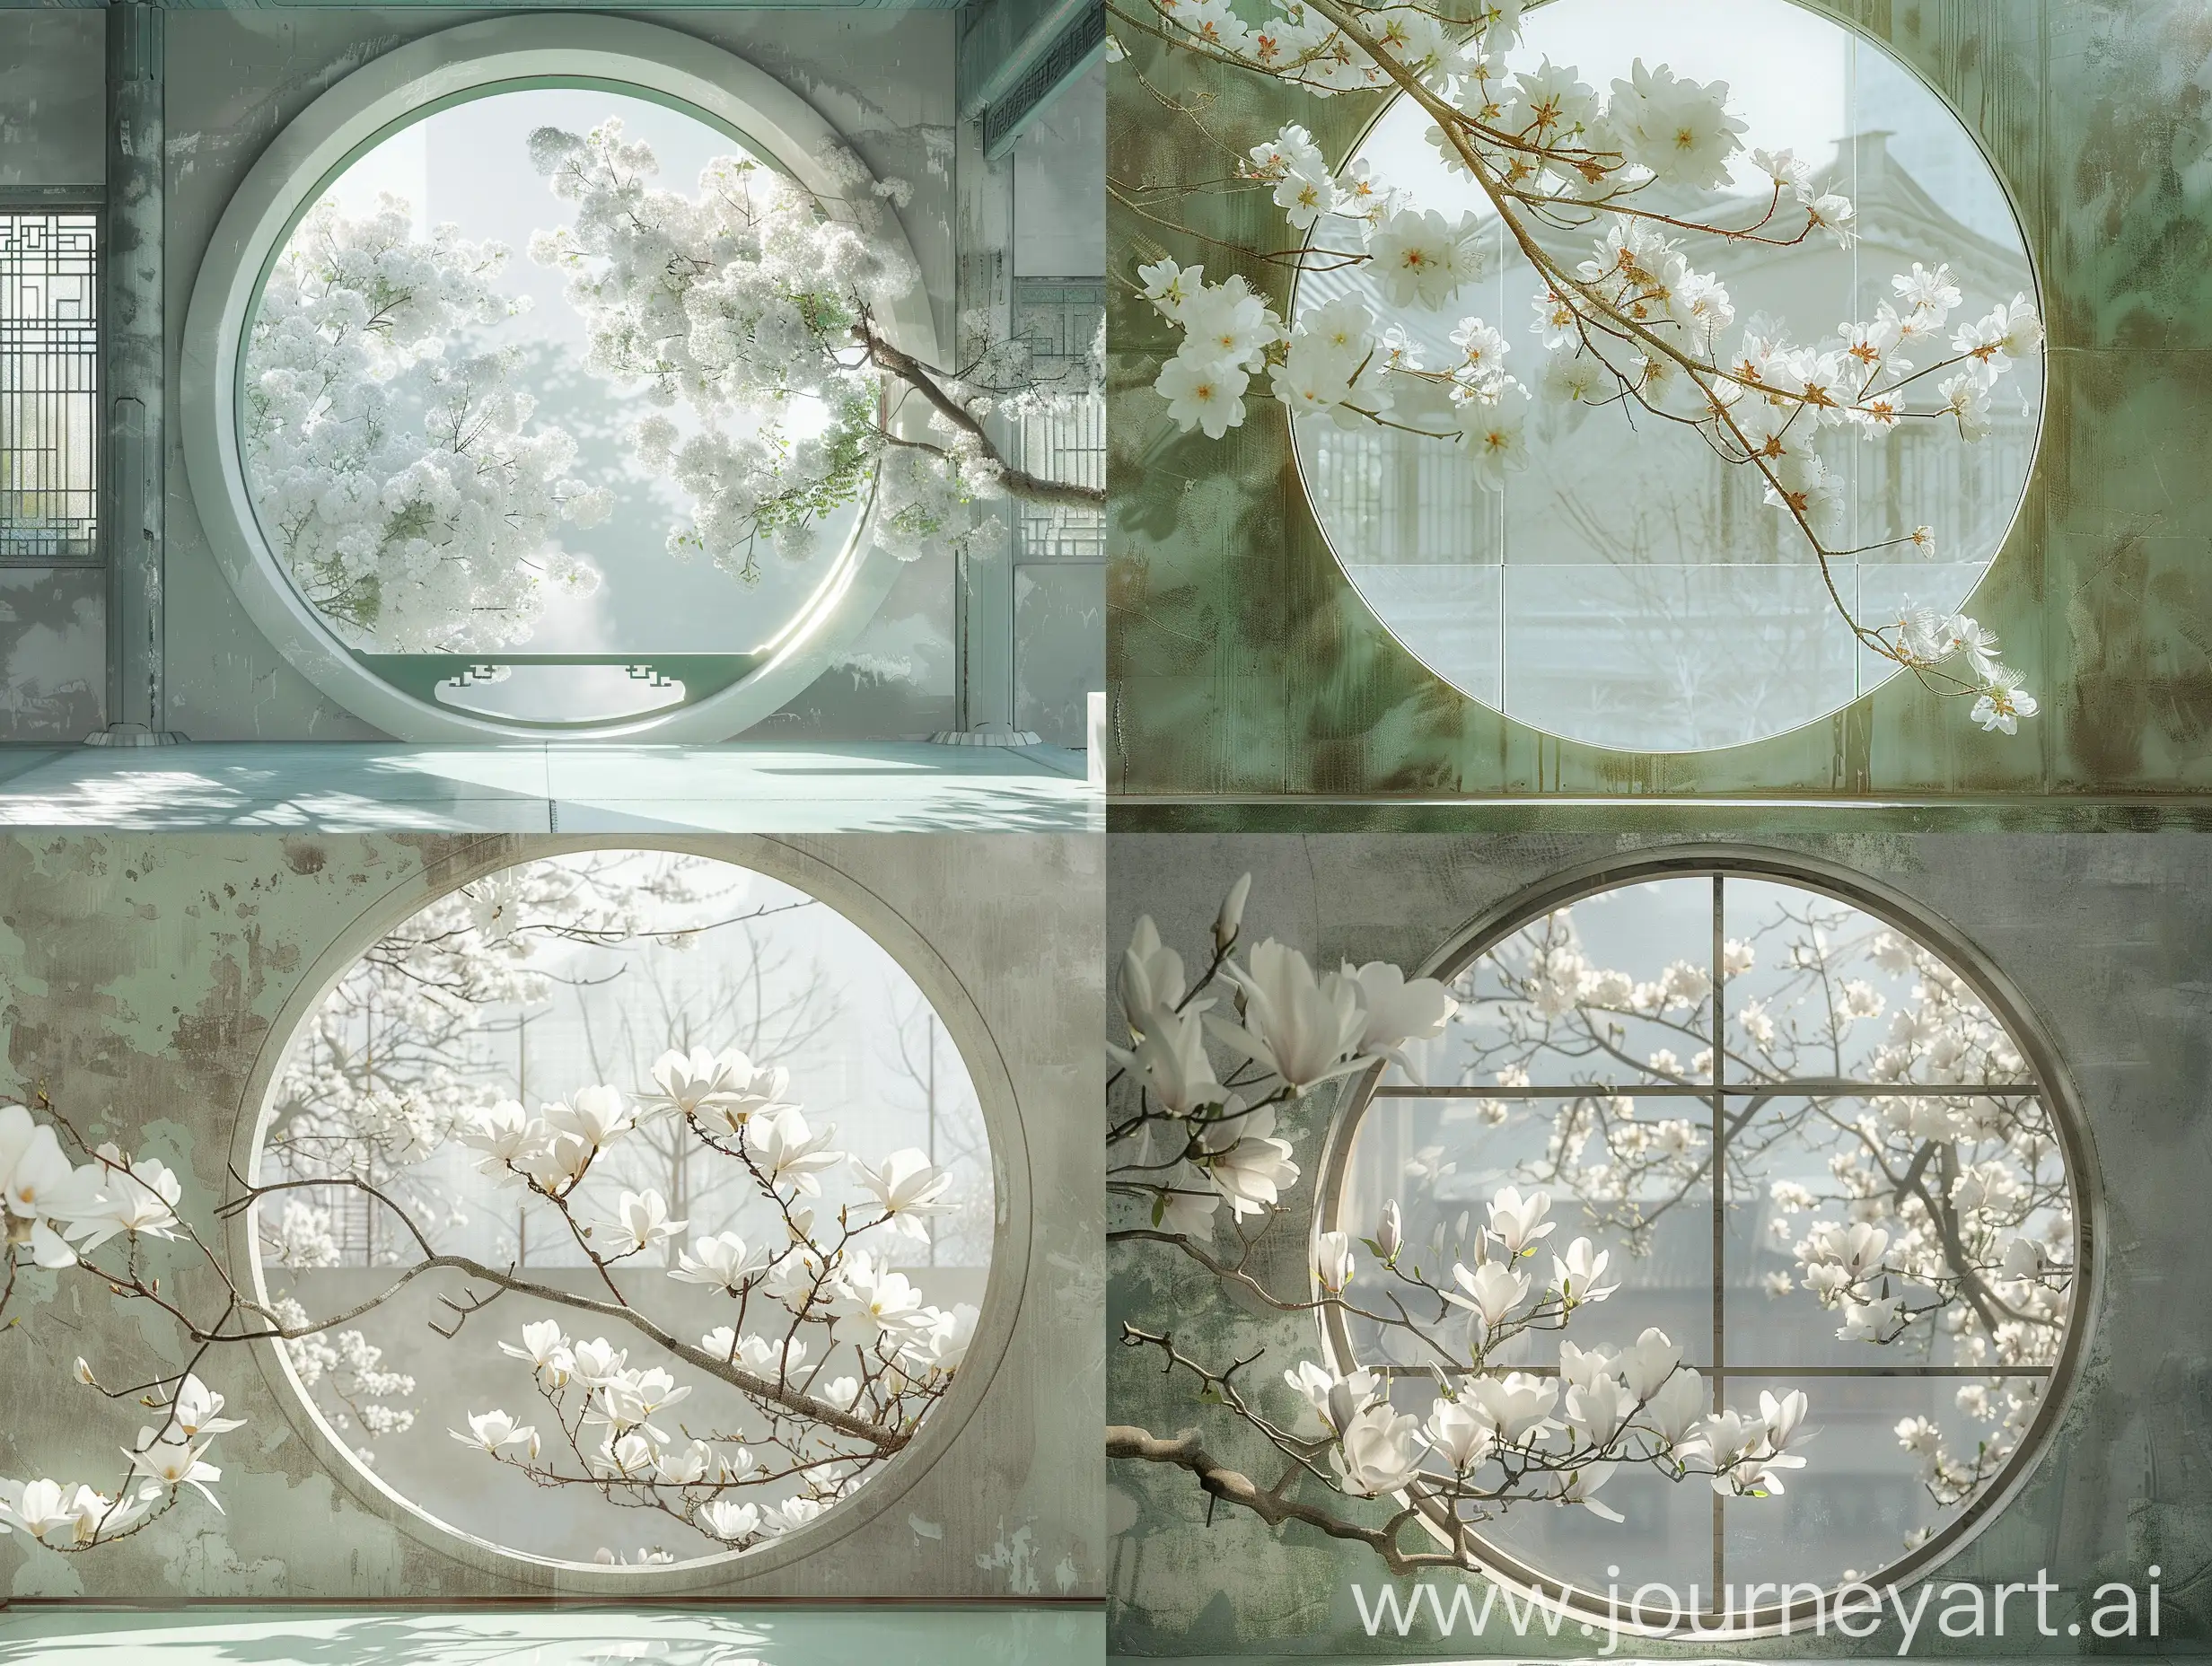 Beijing-East-Village-Style-Round-Window-with-White-Blossoms